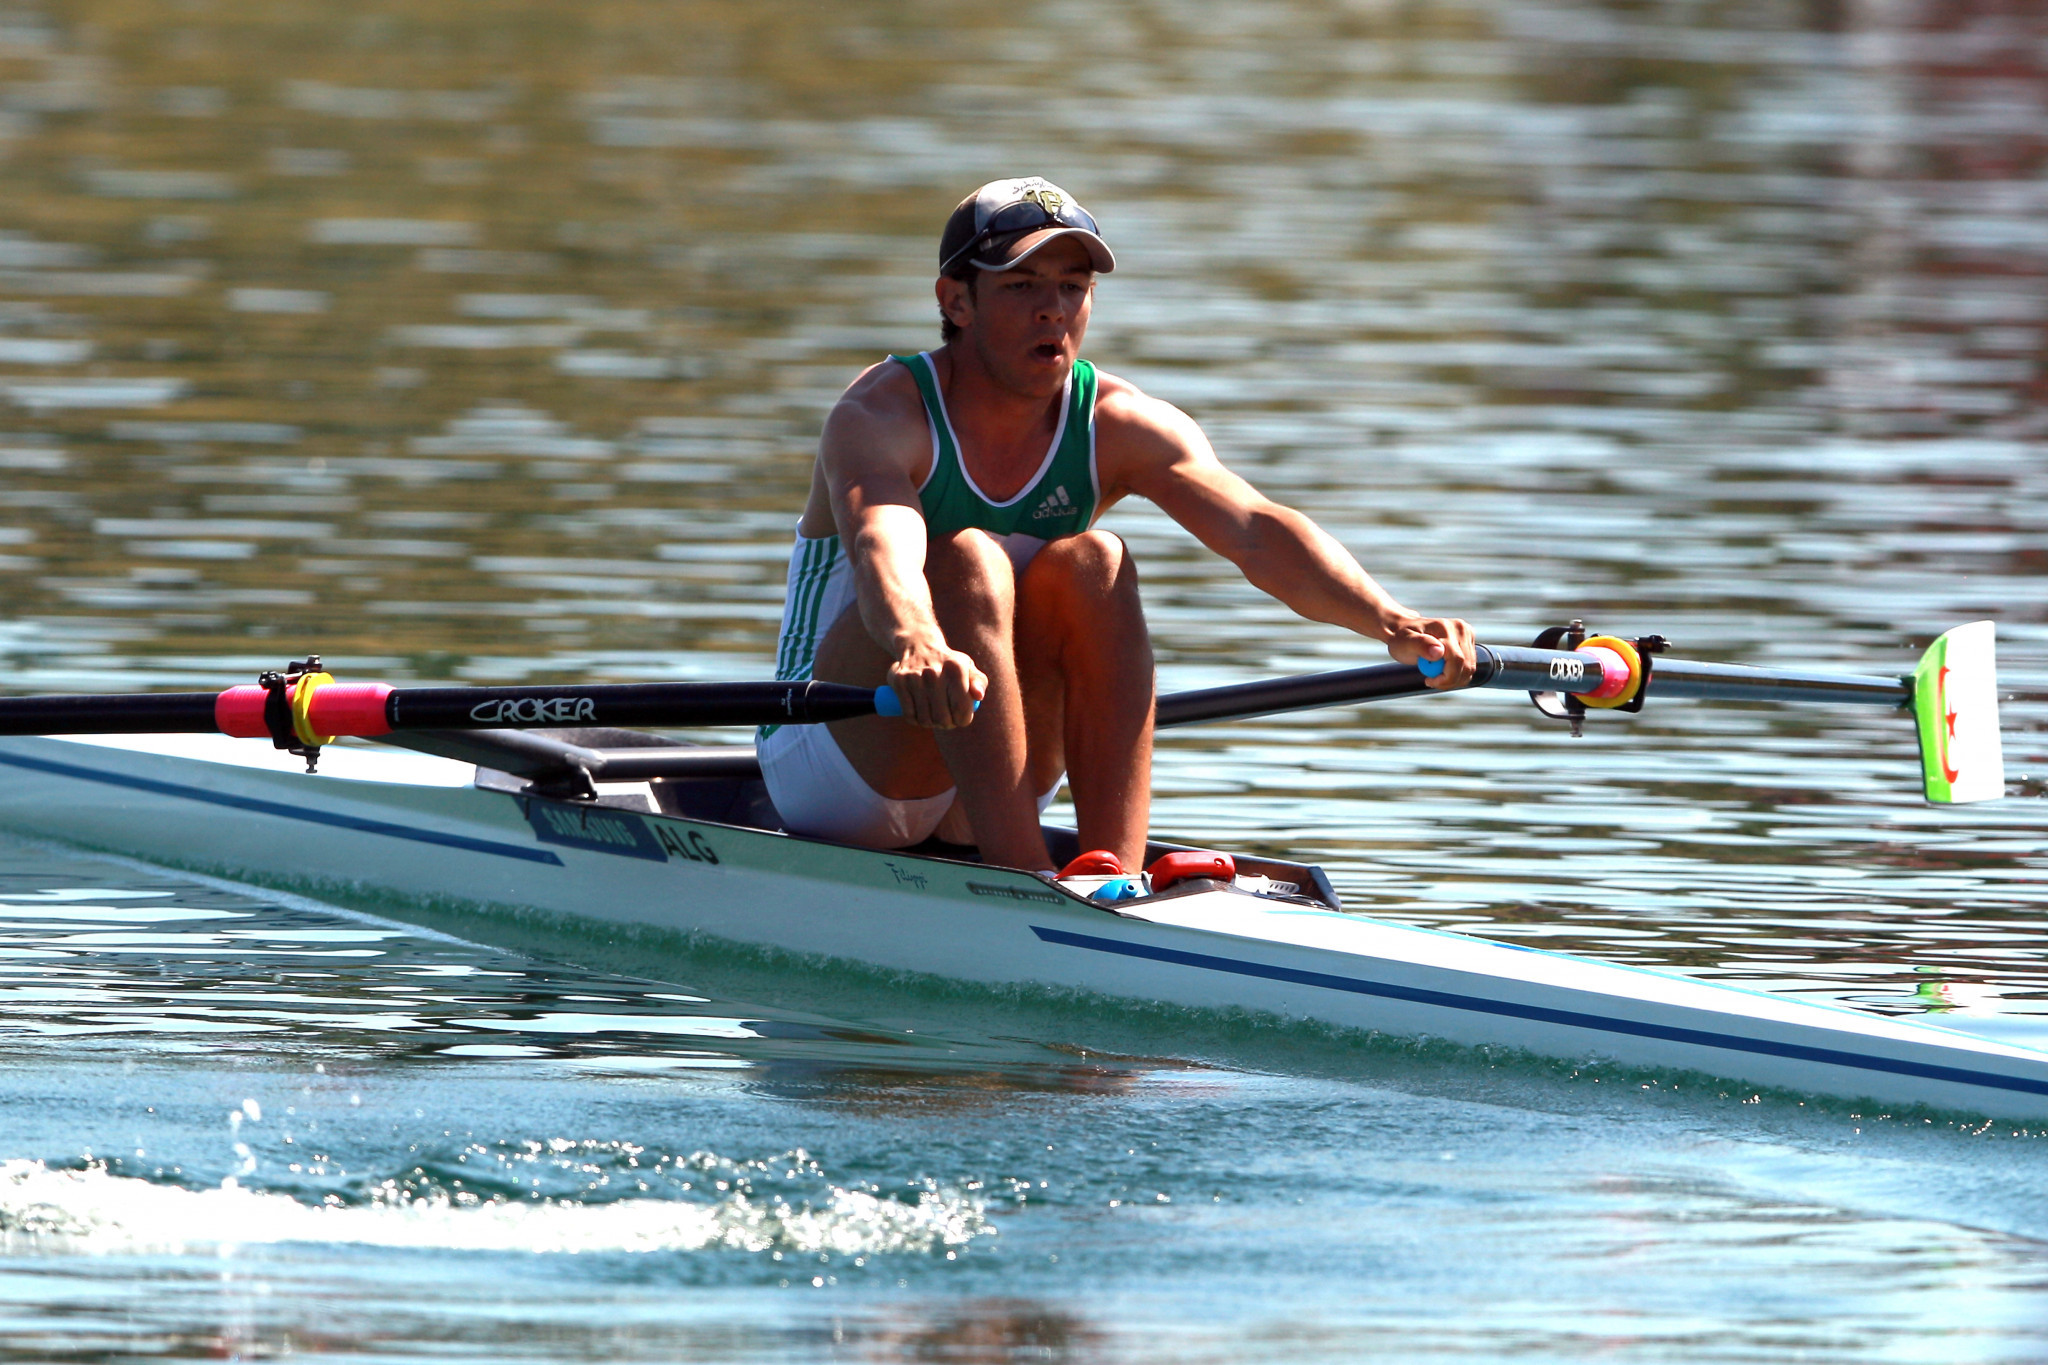 Algeria's Sid Ali Boudina, pictured, teamed up with Kamel Ait Daoud to win the men's lightweight double sculls at the African Rowing Championships in Tunis ©Getty Images